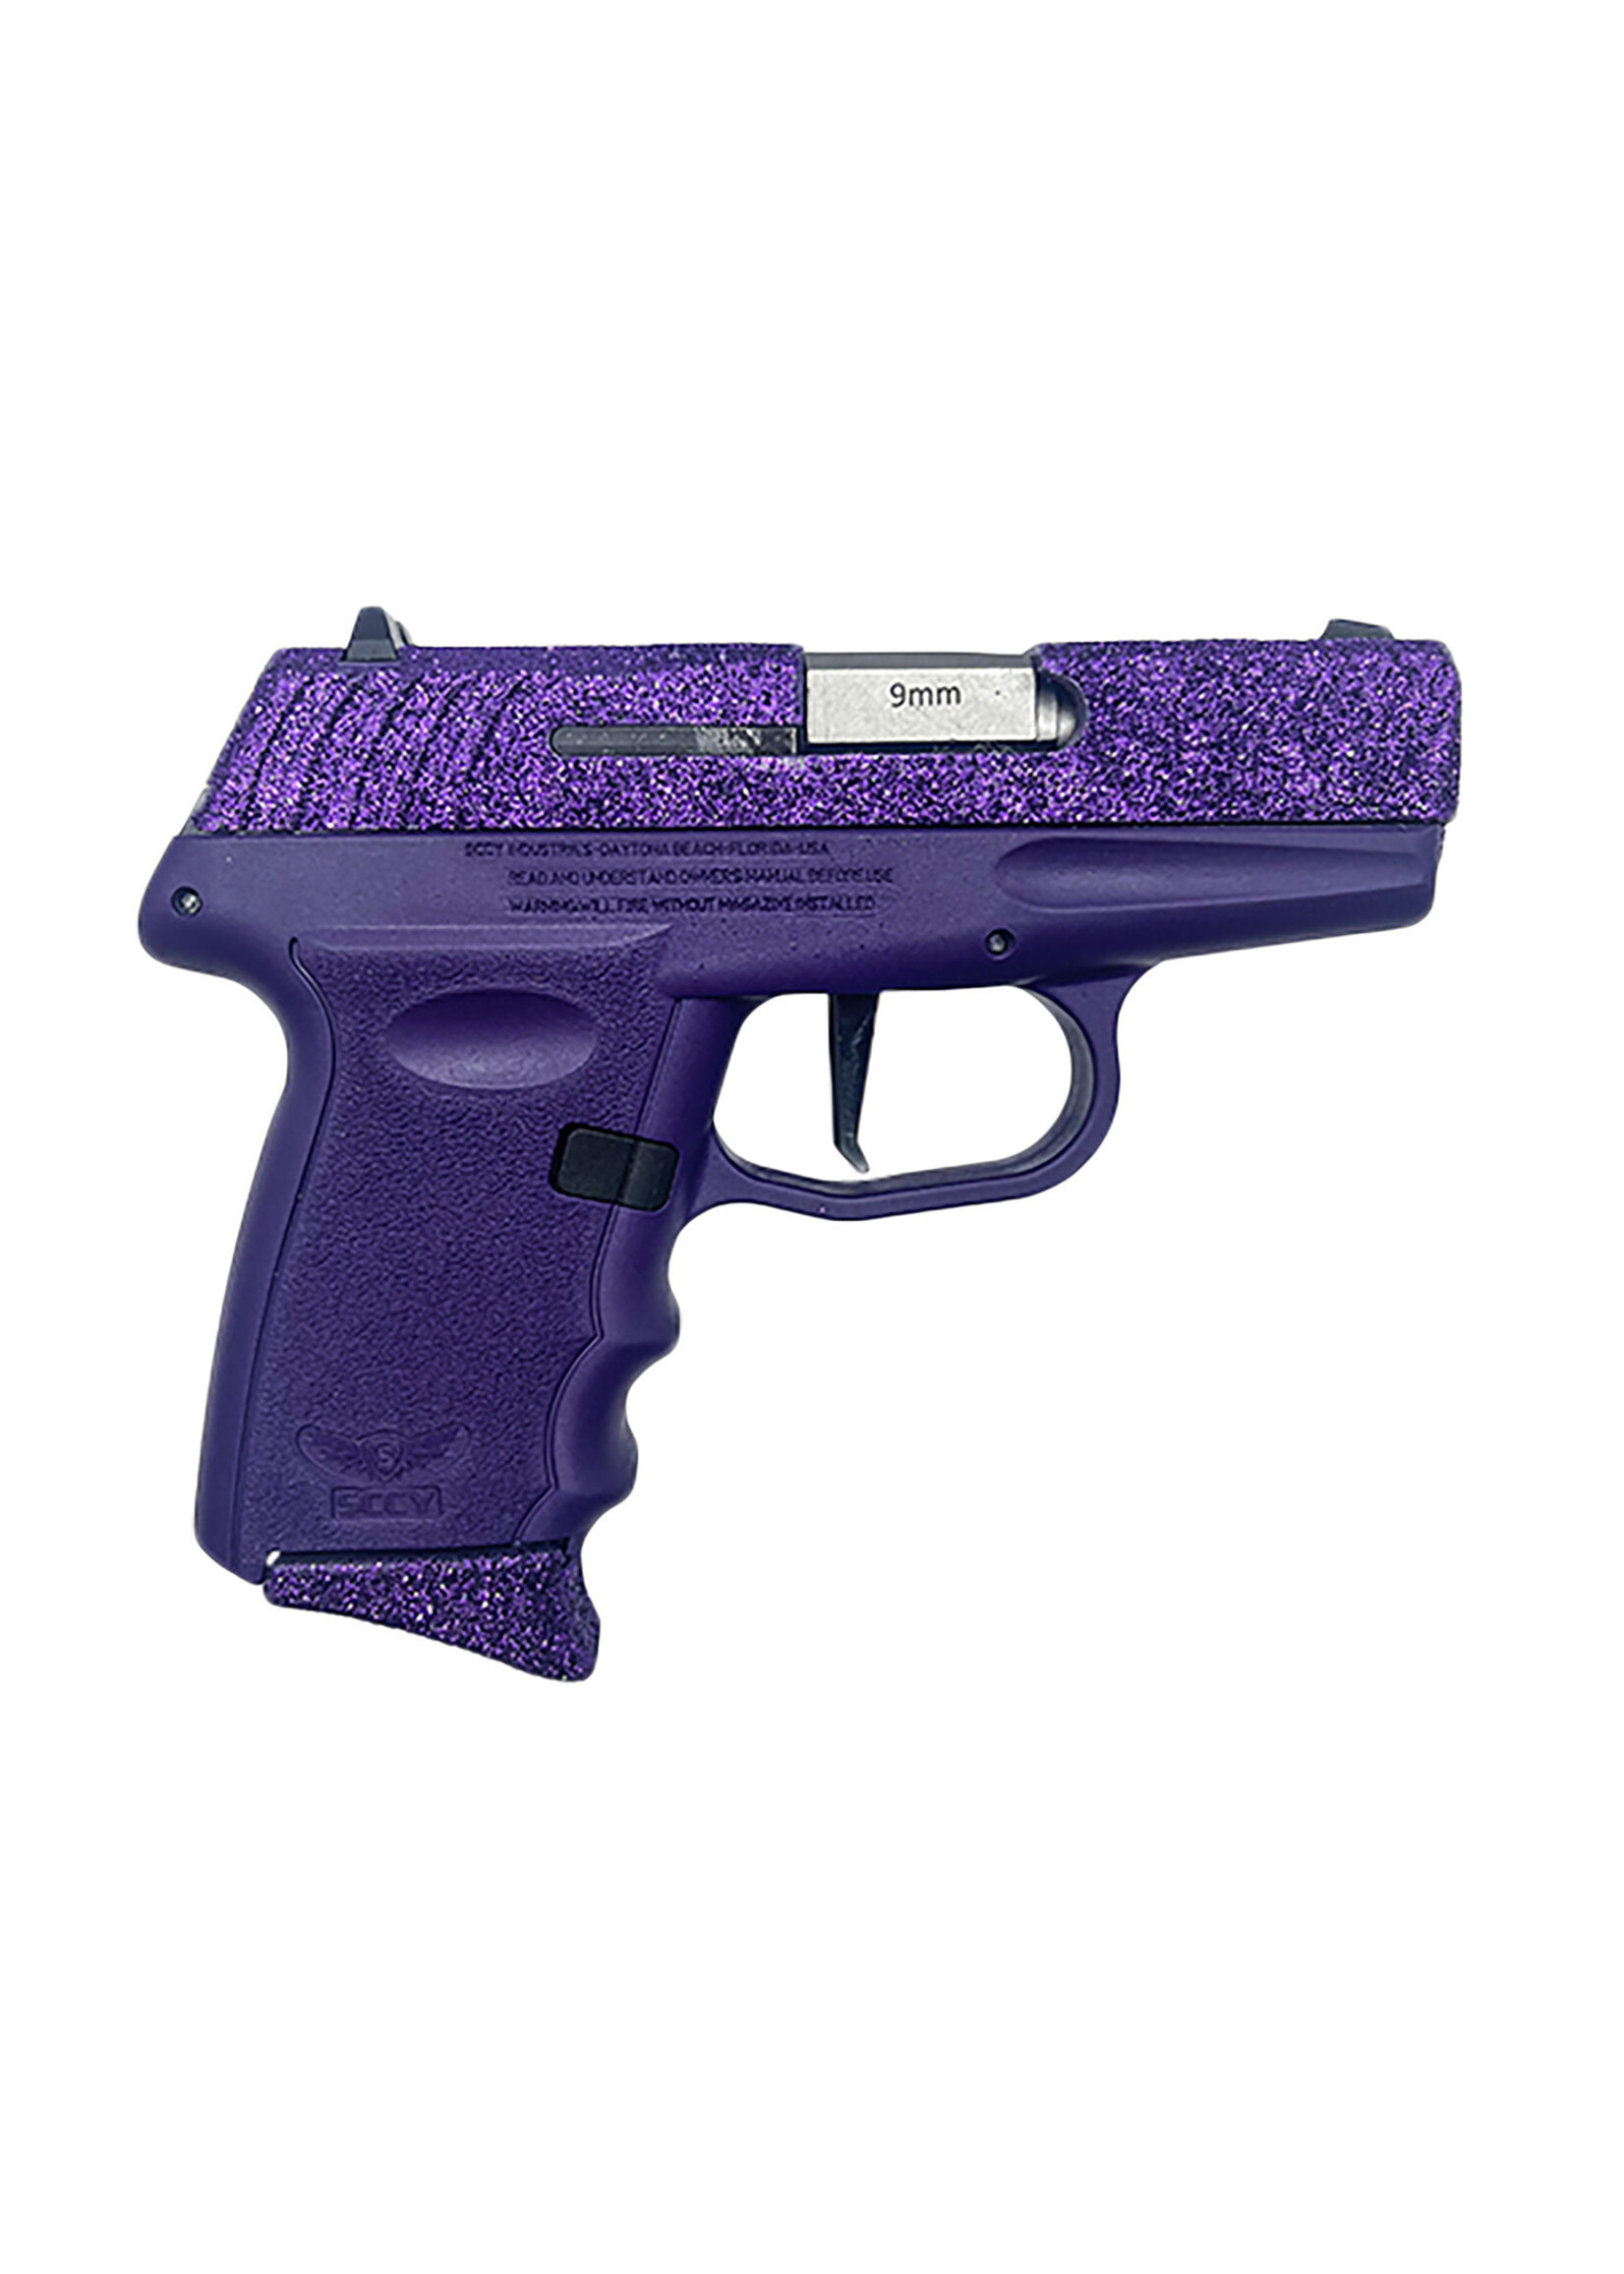 Sccy Industries SCCY Industries DVG1RPPU DVG-1 Sub-Compact Frame 9mm Luger 10+1 3.10" Stainless Quadlock Barrel, Purple Glitter Optic Ready/Serrated Stainless Steel Slide, Royal Purple Polymer Frame & Grip